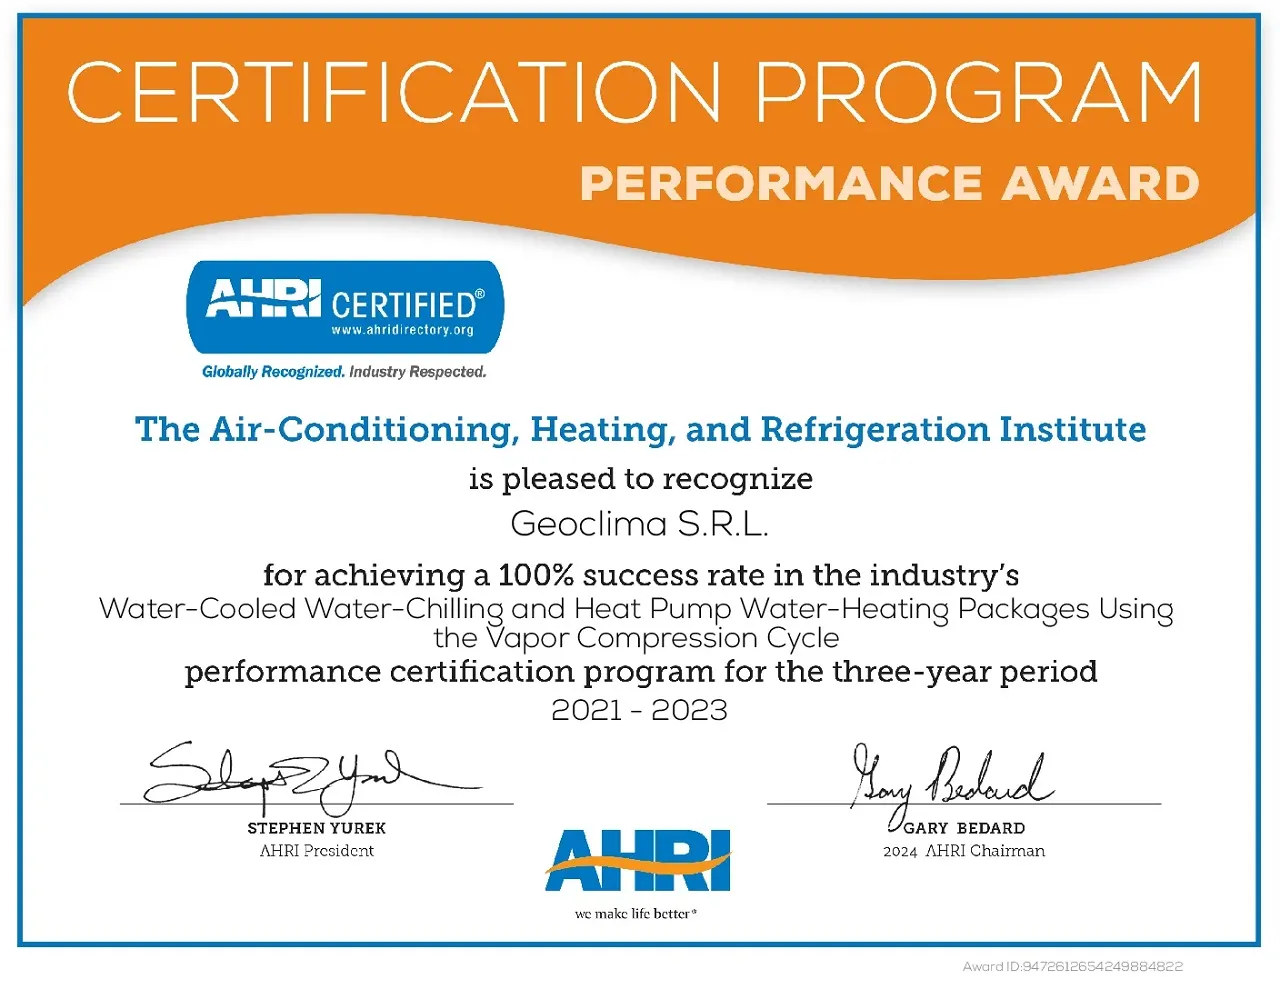 Geoclima received AHRI performance certification